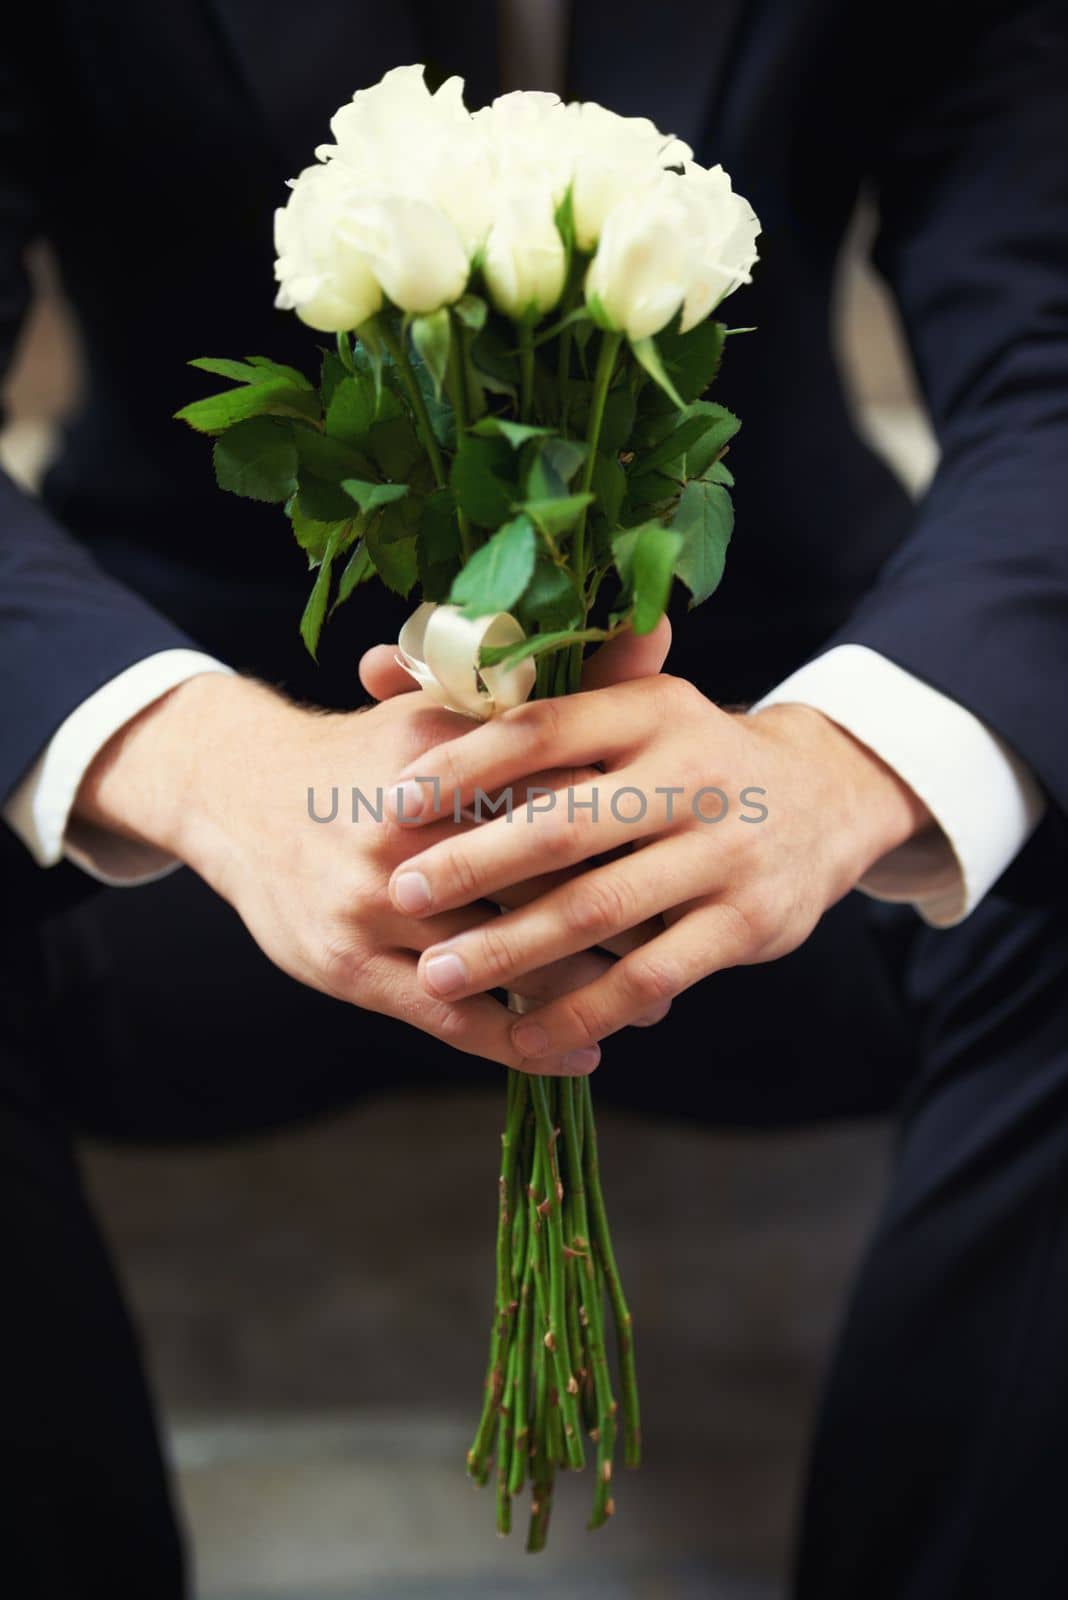 Hands, flowers and man on wedding day waiting for ceremony of love, tradition or romance closeup. Floral bouquet, marriage and commitment with a groom sitting outdoor alone at a celebration event by YuriArcurs